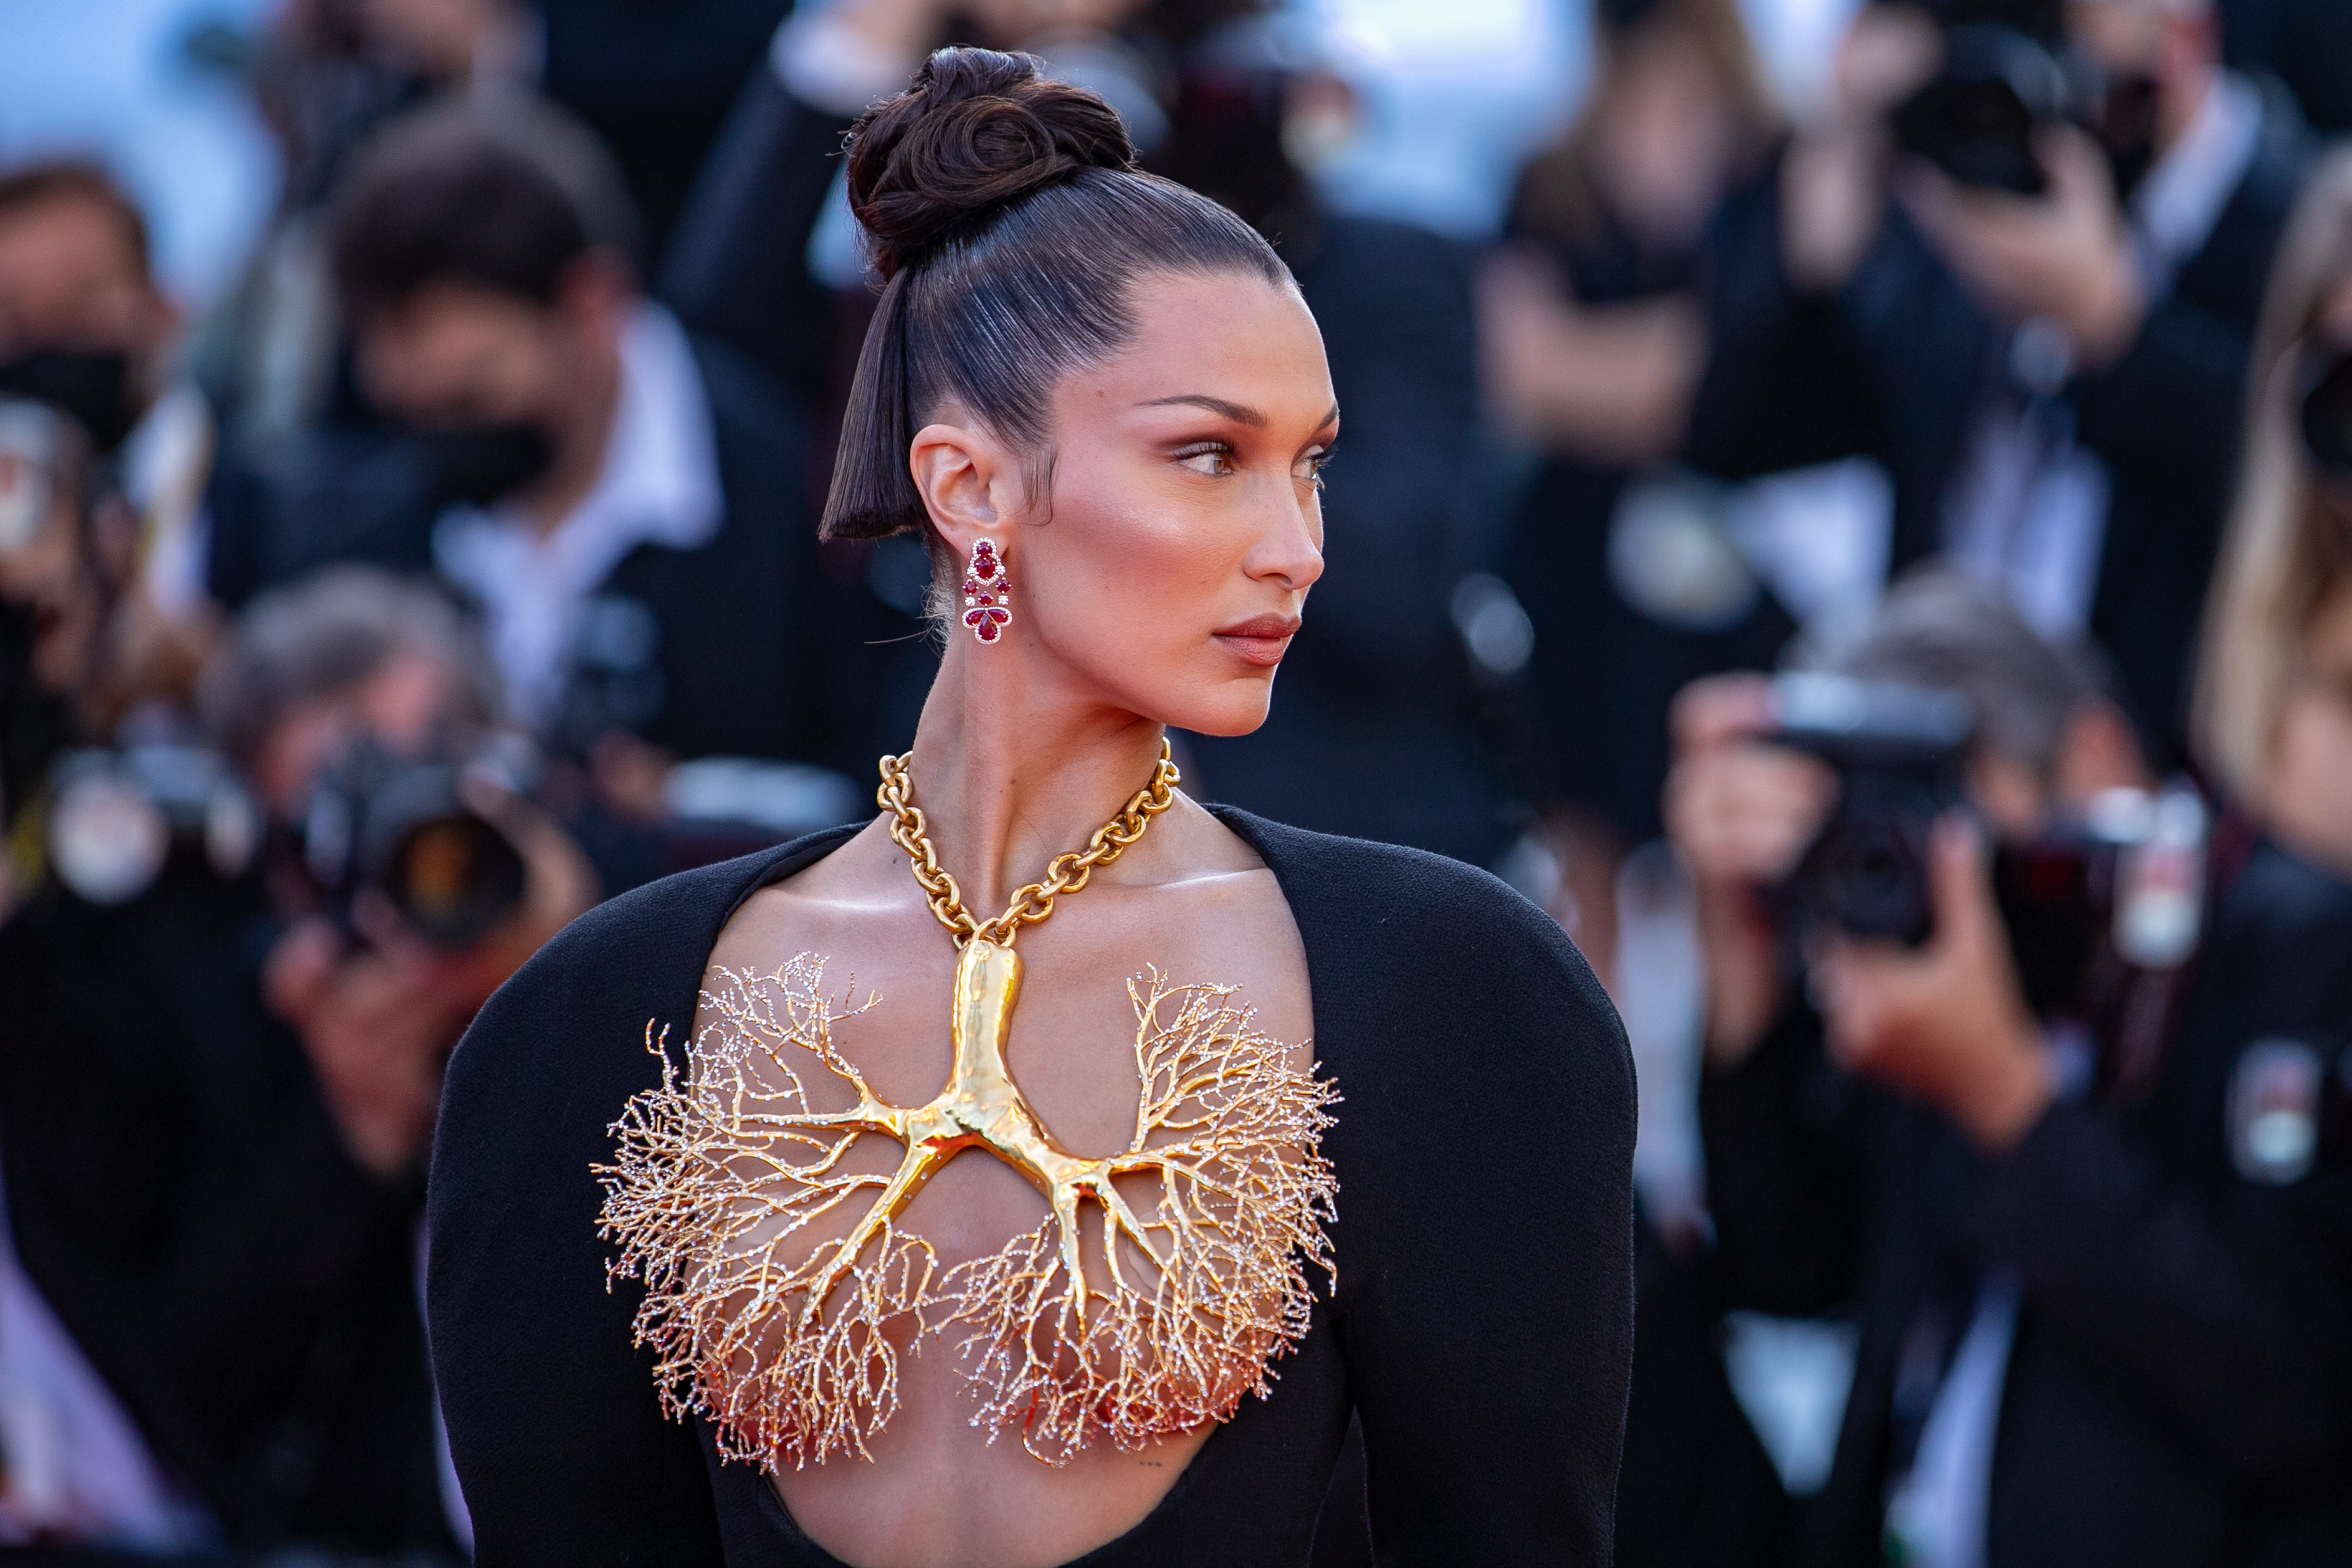 Bella Hadid Wears a Black and White Column Gown at Cannes Film Festival in  2021